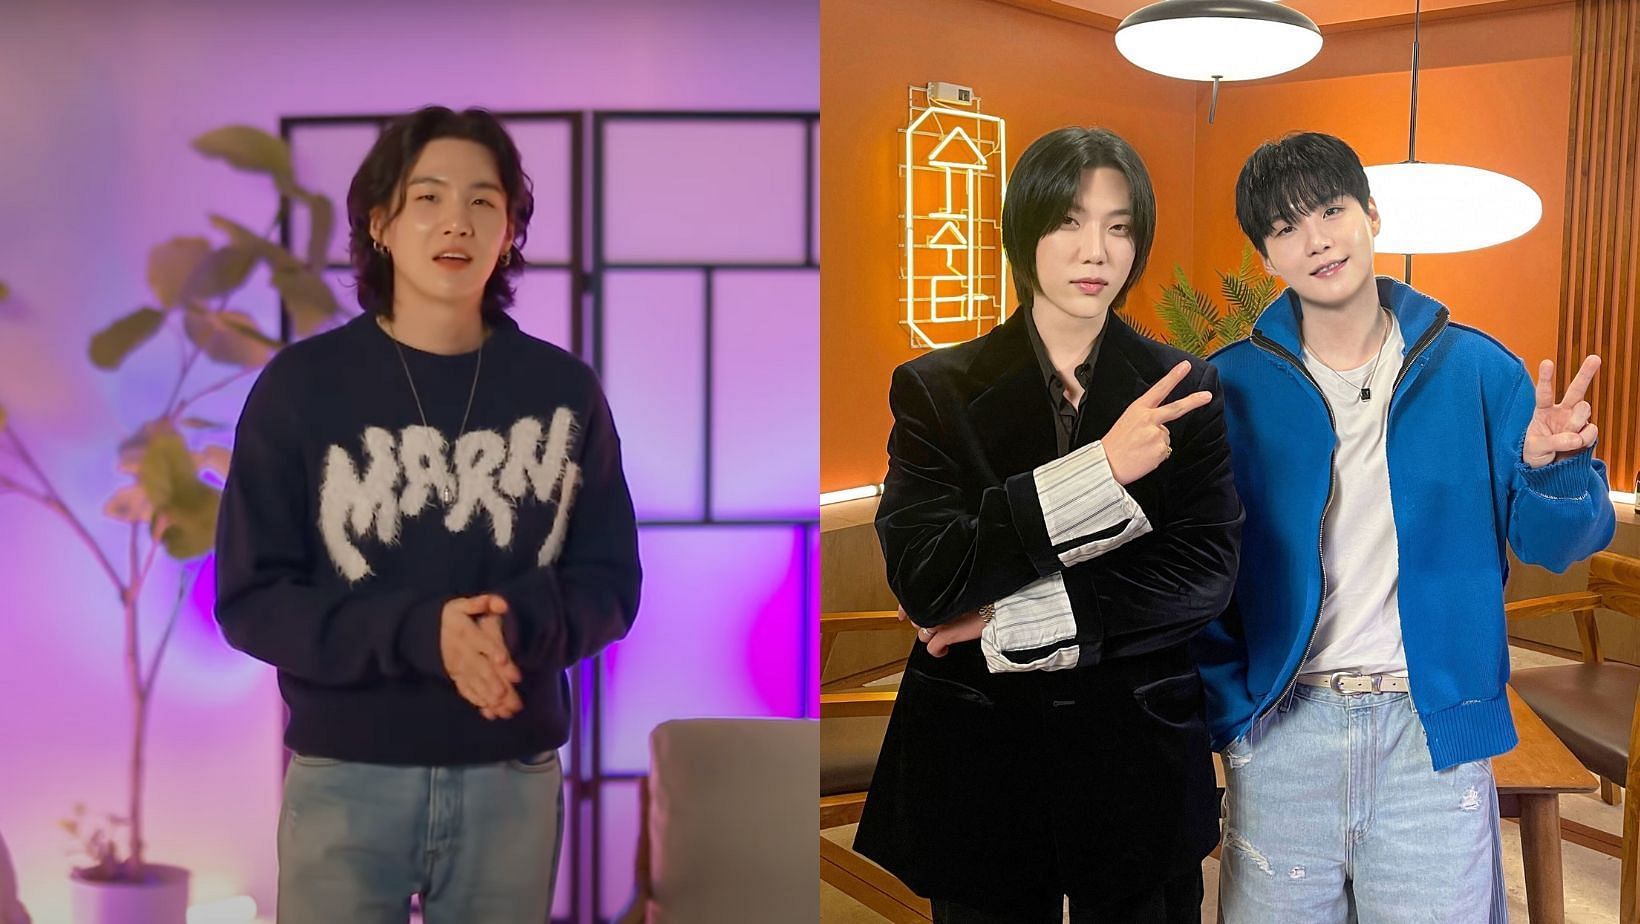 &ldquo;End of an era&rdquo;: BTS Suga closes the first chapter of Suchwita with his close friend EL CAPITXN as the show&rsquo;s last guest. (Images via X/@bts_bighit &amp; YouTube/BANGTANTV)